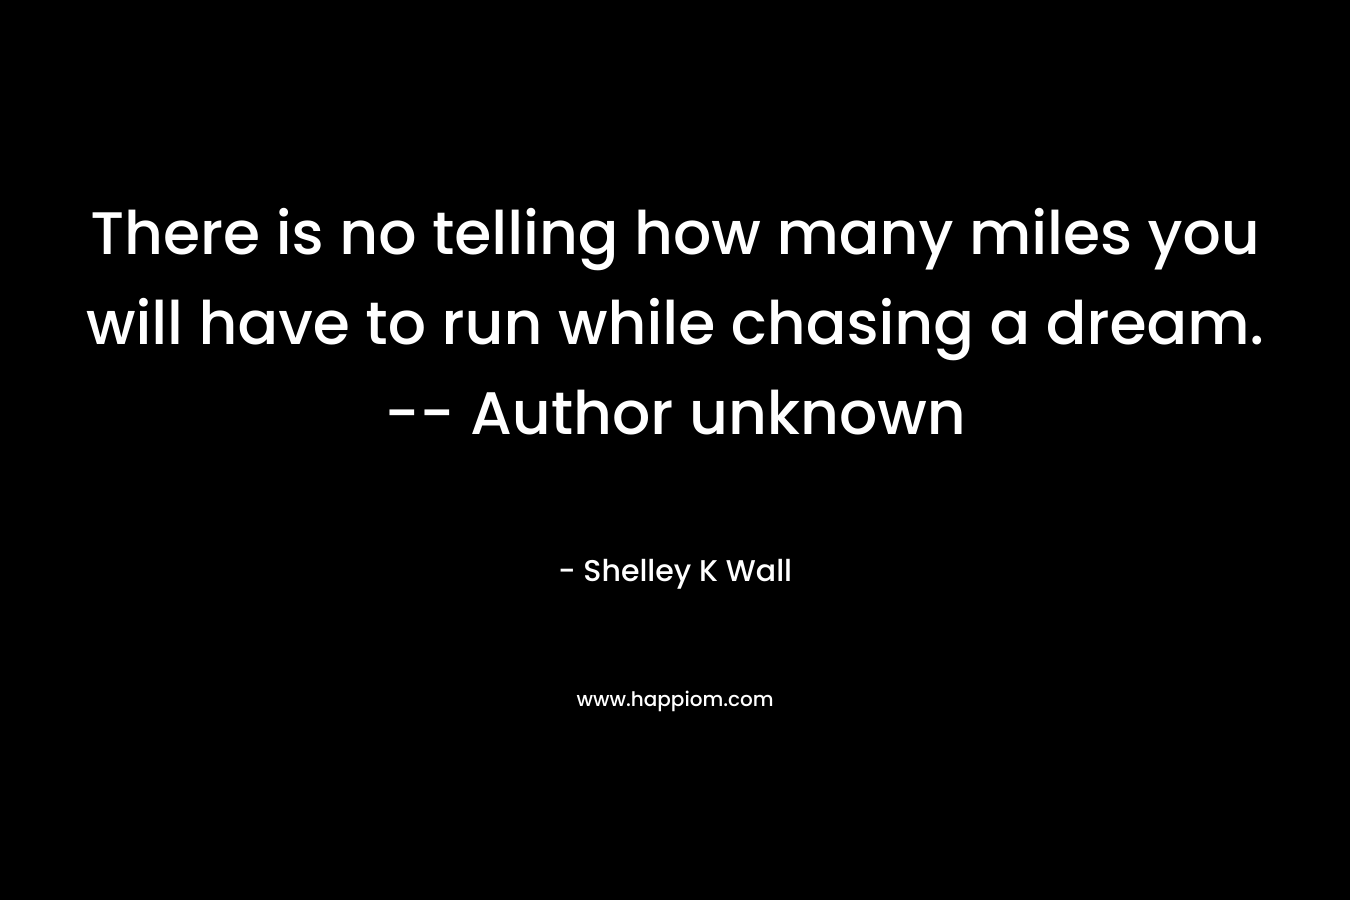 There is no telling how many miles you will have to run while chasing a dream. -- Author unknown